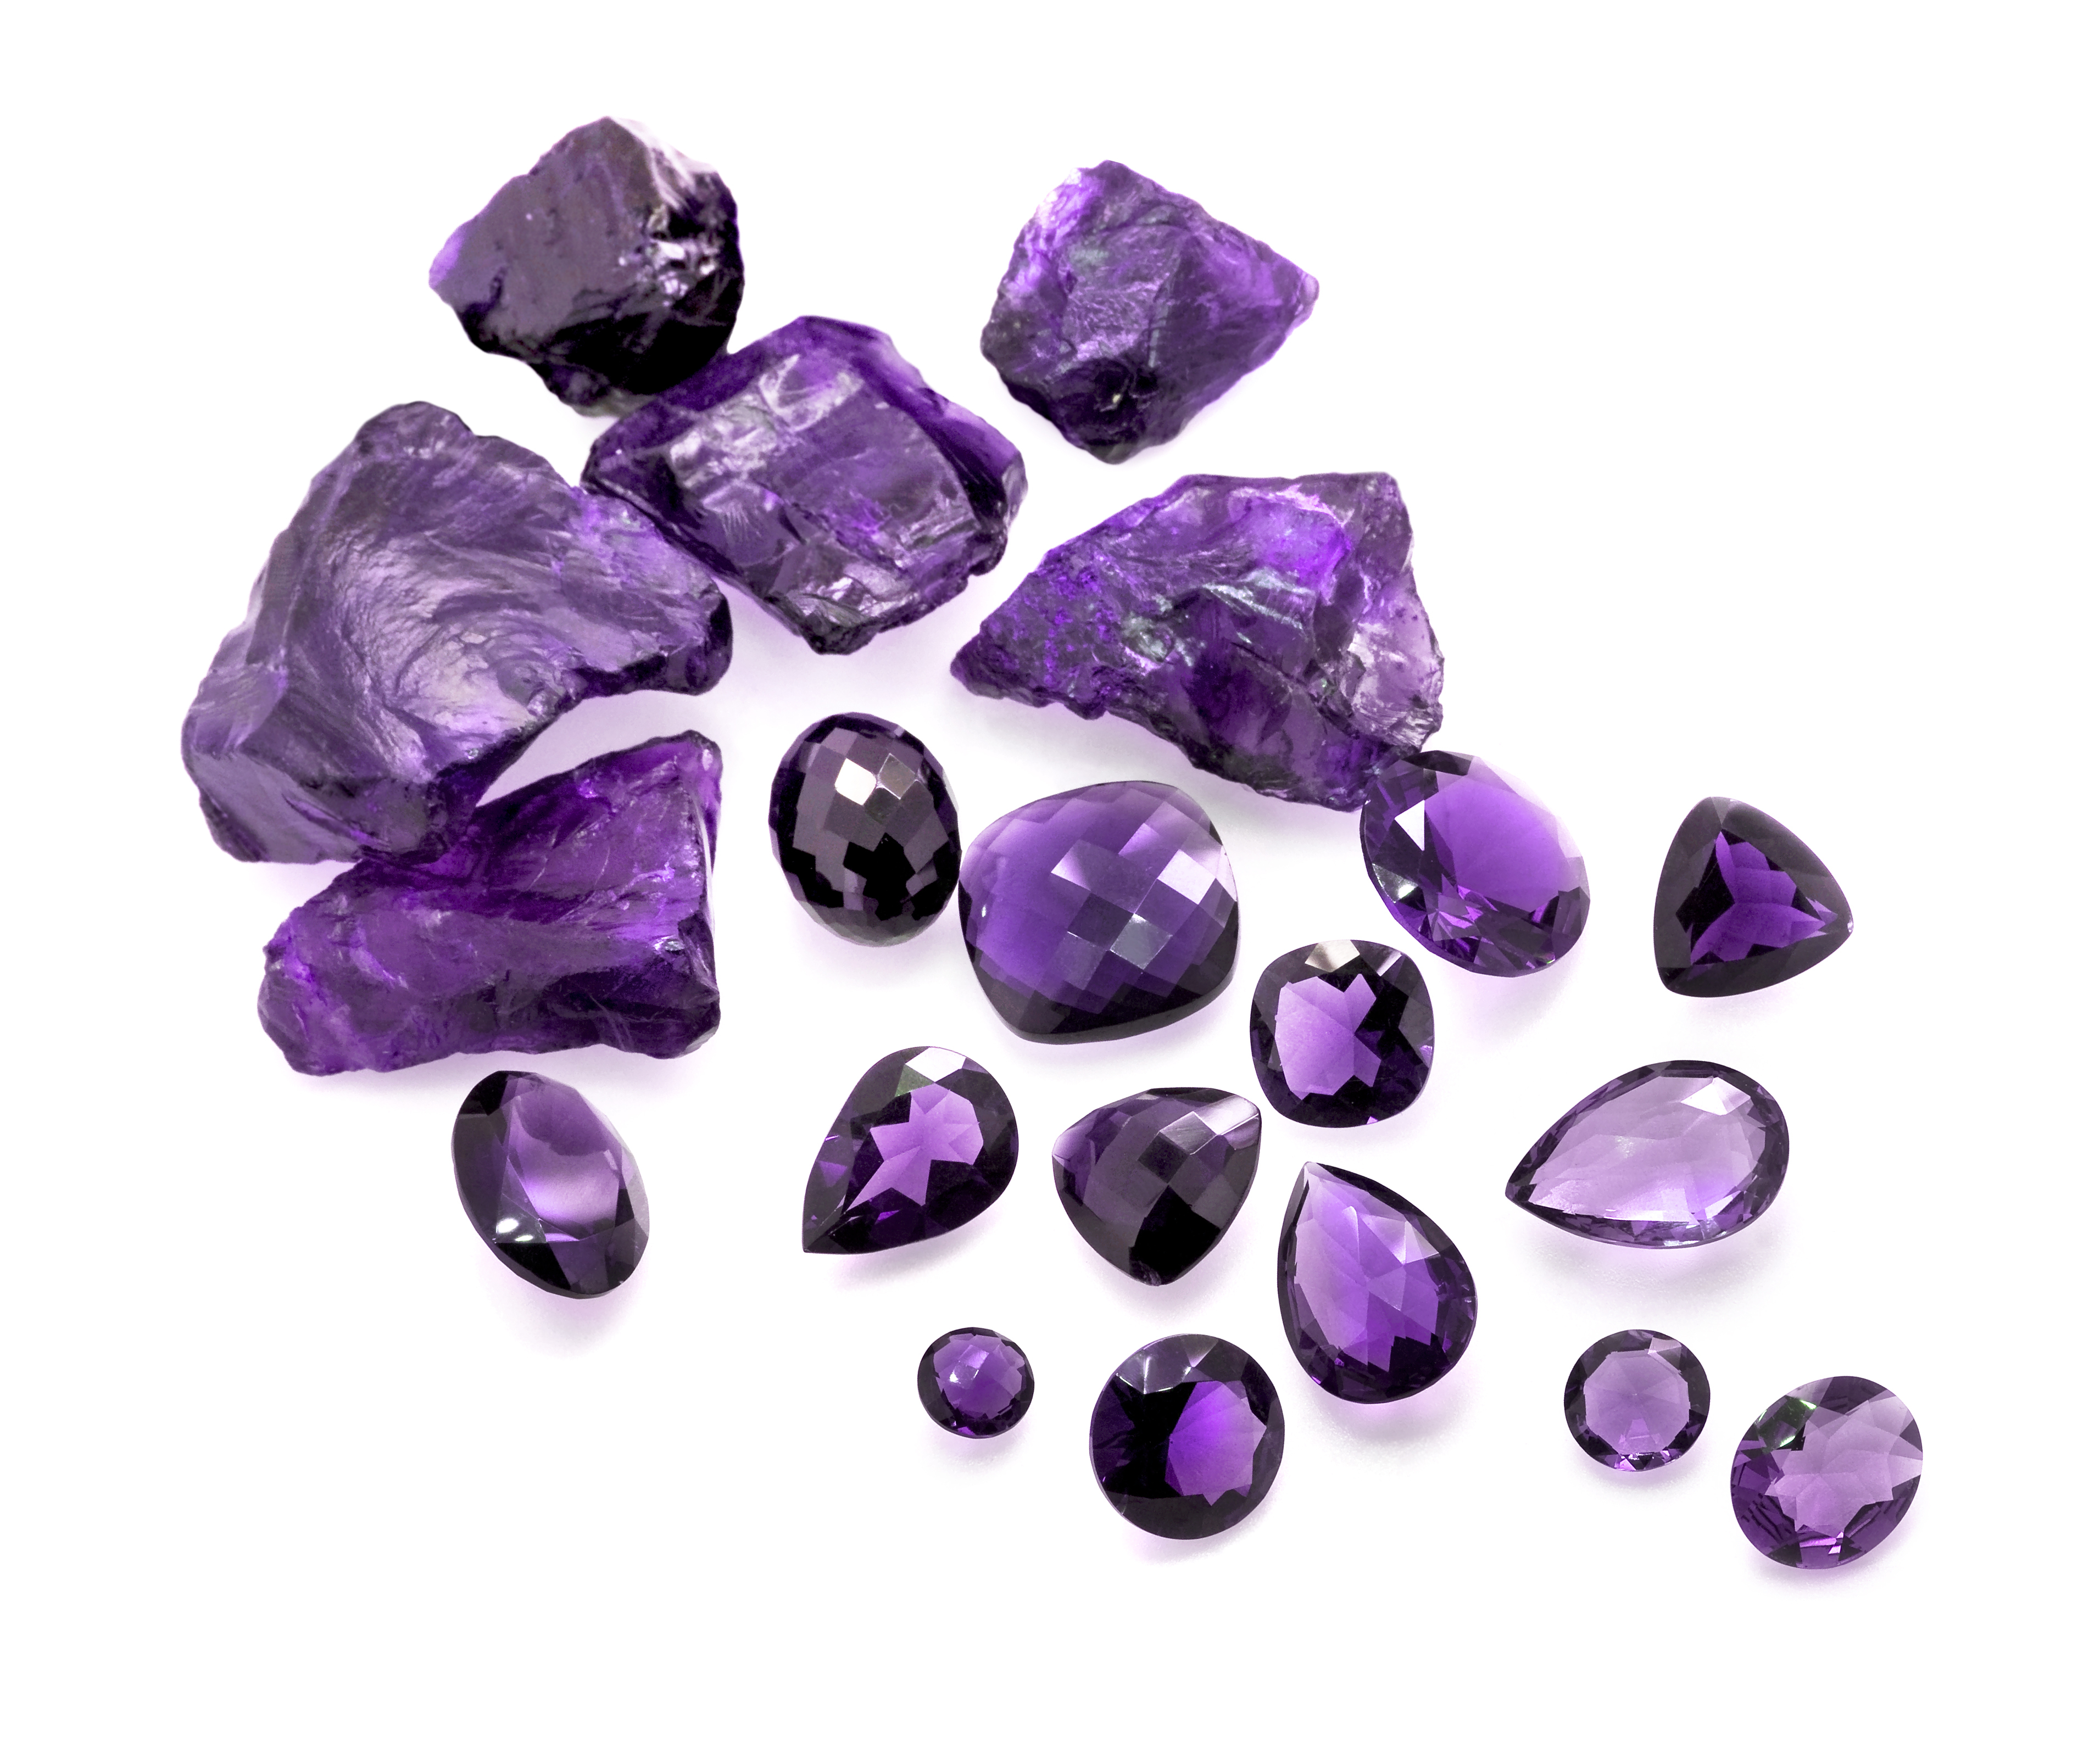 Pieces of polished and raw Amethyst on a white background